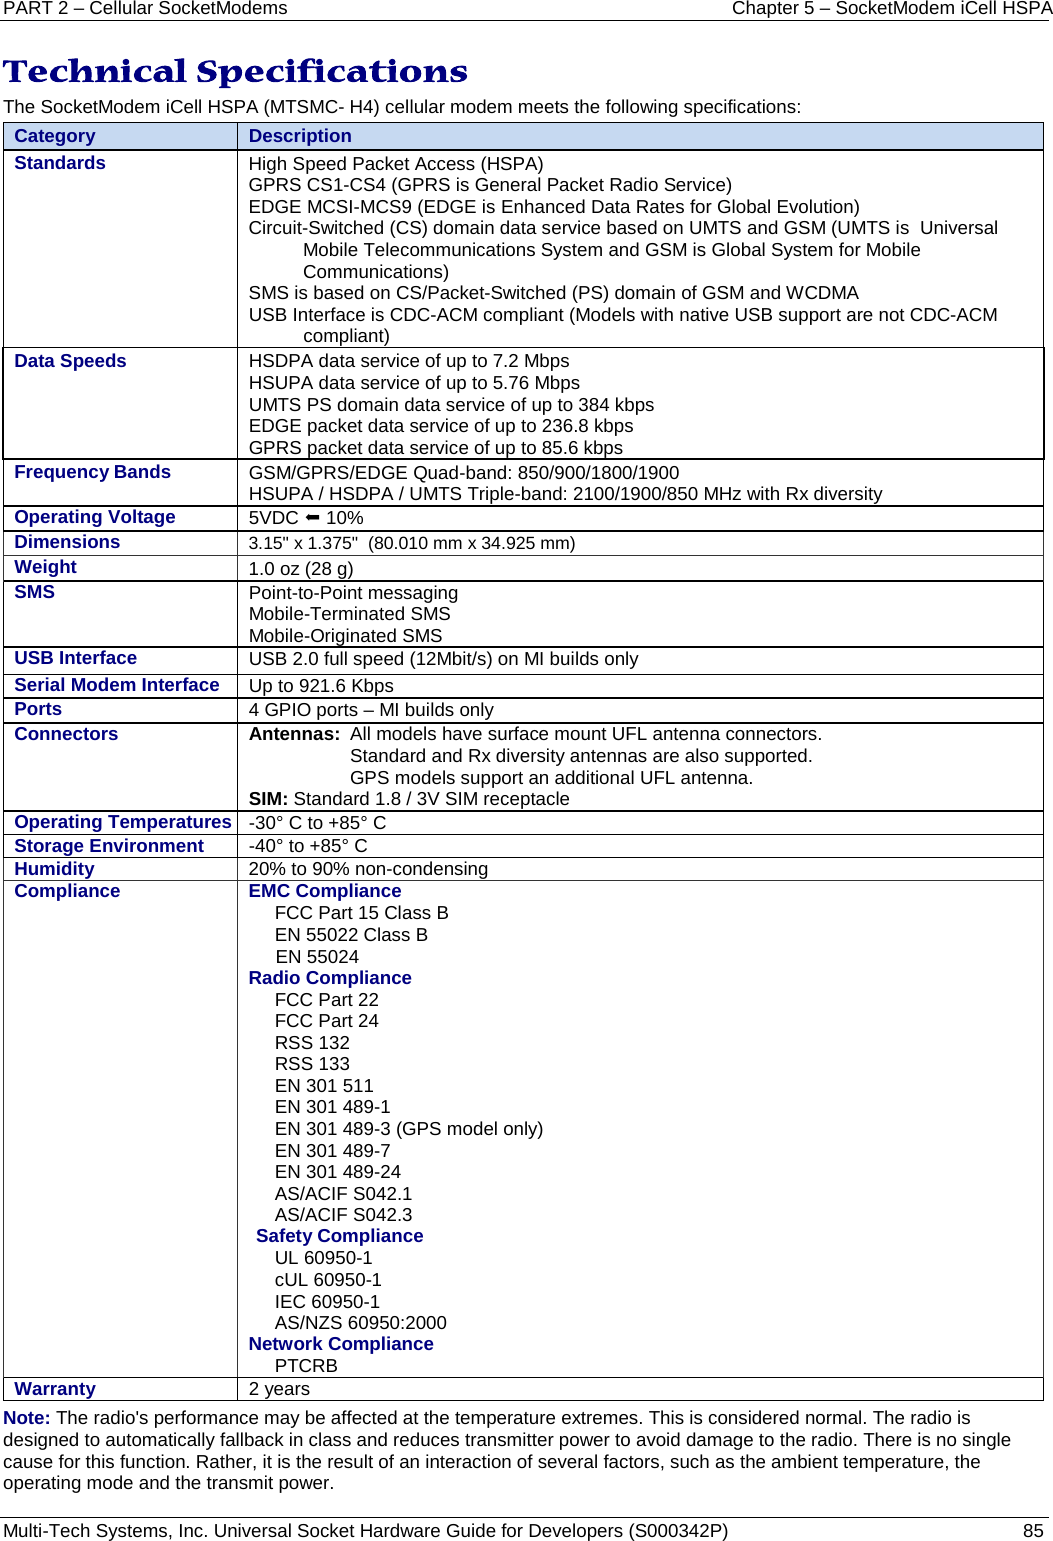 PART 2 – Cellular SocketModems Chapter 5 – SocketModem iCell HSPA Multi-Tech Systems, Inc. Universal Socket Hardware Guide for Developers (S000342P)  85  Technical Specifications   The SocketModem iCell HSPA (MTSMC- H4) cellular modem meets the following specifications:  Category Description Standards High Speed Packet Access (HSPA) GPRS CS1-CS4 (GPRS is General Packet Radio Service) EDGE MCSI-MCS9 (EDGE is Enhanced Data Rates for Global Evolution) Circuit-Switched (CS) domain data service based on UMTS and GSM (UMTS is  Universal Mobile Telecommunications System and GSM is Global System for Mobile Communications) SMS is based on CS/Packet-Switched (PS) domain of GSM and WCDMA USB Interface is CDC-ACM compliant (Models with native USB support are not CDC-ACM compliant)  Data Speeds HSDPA data service of up to 7.2 Mbps  HSUPA data service of up to 5.76 Mbps UMTS PS domain data service of up to 384 kbps EDGE packet data service of up to 236.8 kbps GPRS packet data service of up to 85.6 kbps Frequency Bands GSM/GPRS/EDGE Quad-band: 850/900/1800/1900 HSUPA / HSDPA / UMTS Triple-band: 2100/1900/850 MHz with Rx diversity  Operating Voltage  5VDC  10%      Dimensions 3.15&quot; x 1.375&quot;  (80.010 mm x 34.925 mm) Weight 1.0 oz (28 g) SMS  Point-to-Point messaging Mobile-Terminated SMS Mobile-Originated SMS USB Interface USB 2.0 full speed (12Mbit/s) on MI builds only Serial Modem Interface Up to 921.6 Kbps Ports 4 GPIO ports – MI builds only Connectors Antennas: All models have surface mount UFL antenna connectors.    Standard and Rx diversity antennas are also supported.    GPS models support an additional UFL antenna. SIM: Standard 1.8 / 3V SIM receptacle Operating Temperatures -30° C to +85° C    Storage Environment -40° to +85° C  Humidity 20% to 90% non-condensing Compliance EMC Compliance  FCC Part 15 Class B EN 55022 Class B EN 55024 Radio Compliance FCC Part 22 FCC Part 24 RSS 132 RSS 133 EN 301 511 EN 301 489-1 EN 301 489-3 (GPS model only) EN 301 489-7 EN 301 489-24 AS/ACIF S042.1 AS/ACIF S042.3 Safety Compliance UL 60950-1 cUL 60950-1 IEC 60950-1 AS/NZS 60950:2000 Network Compliance  PTCRB Warranty 2 years Note: The radio&apos;s performance may be affected at the temperature extremes. This is considered normal. The radio is designed to automatically fallback in class and reduces transmitter power to avoid damage to the radio. There is no single cause for this function. Rather, it is the result of an interaction of several factors, such as the ambient temperature, the operating mode and the transmit power.   